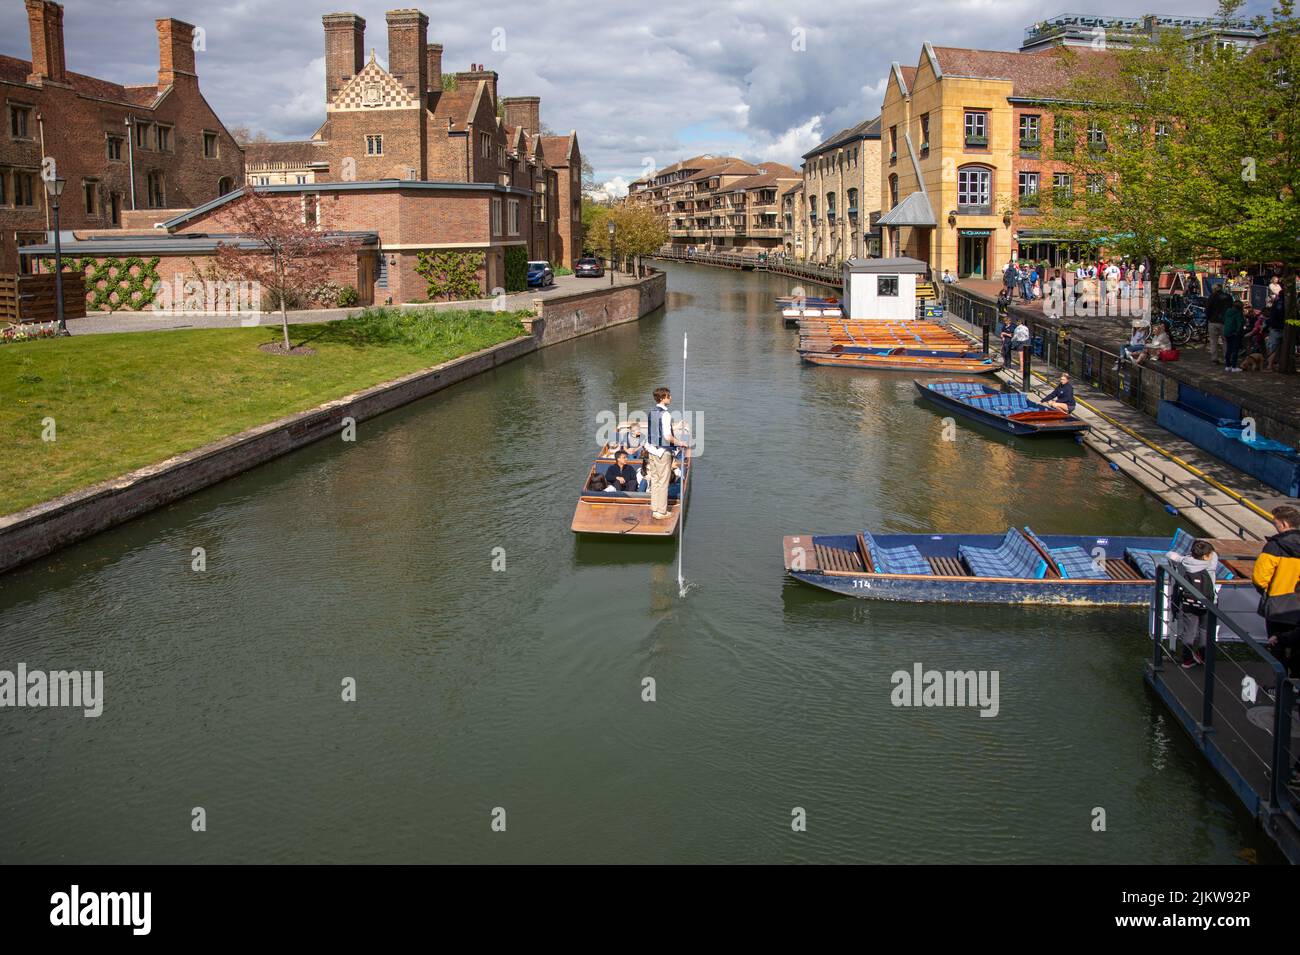 People punting on the river Cam in Cambridge on a sunny day Banque D'Images